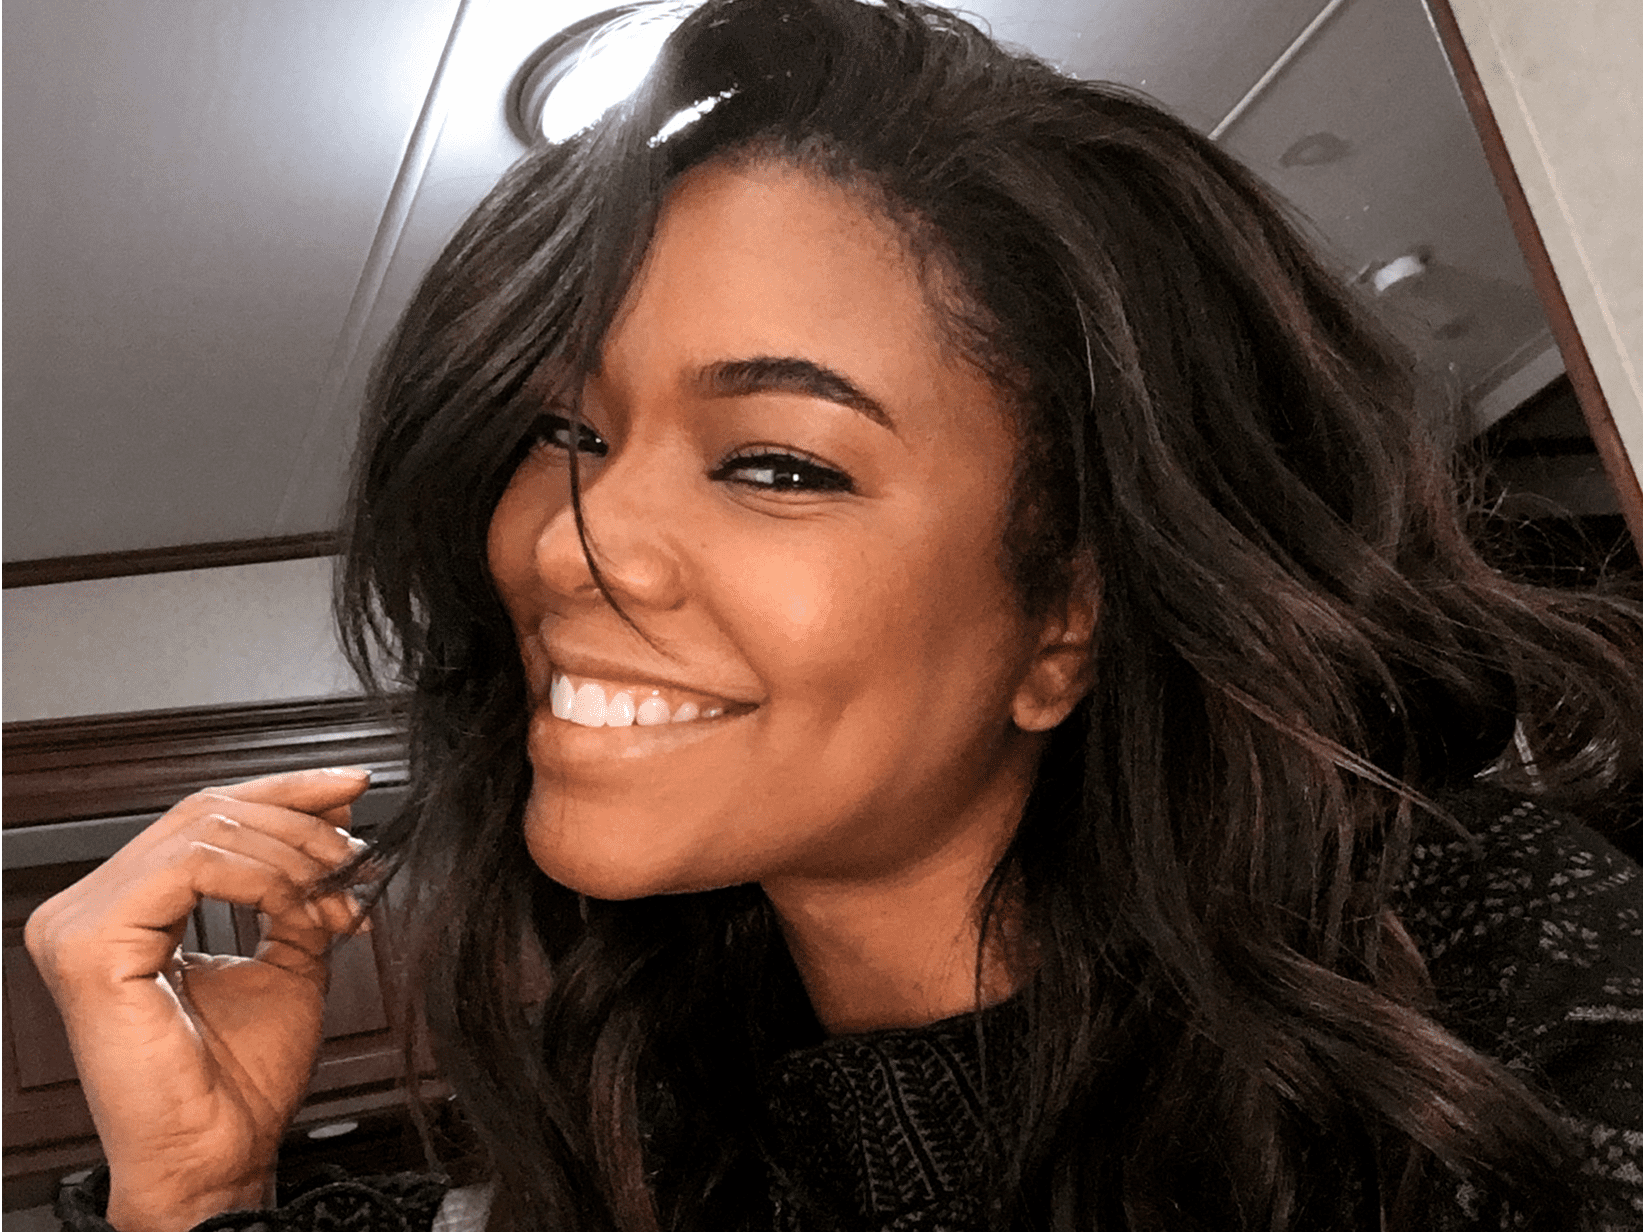 gabrielle-union-makes-your-day-with-new-photos-of-her-baby-girl-kaavia-james